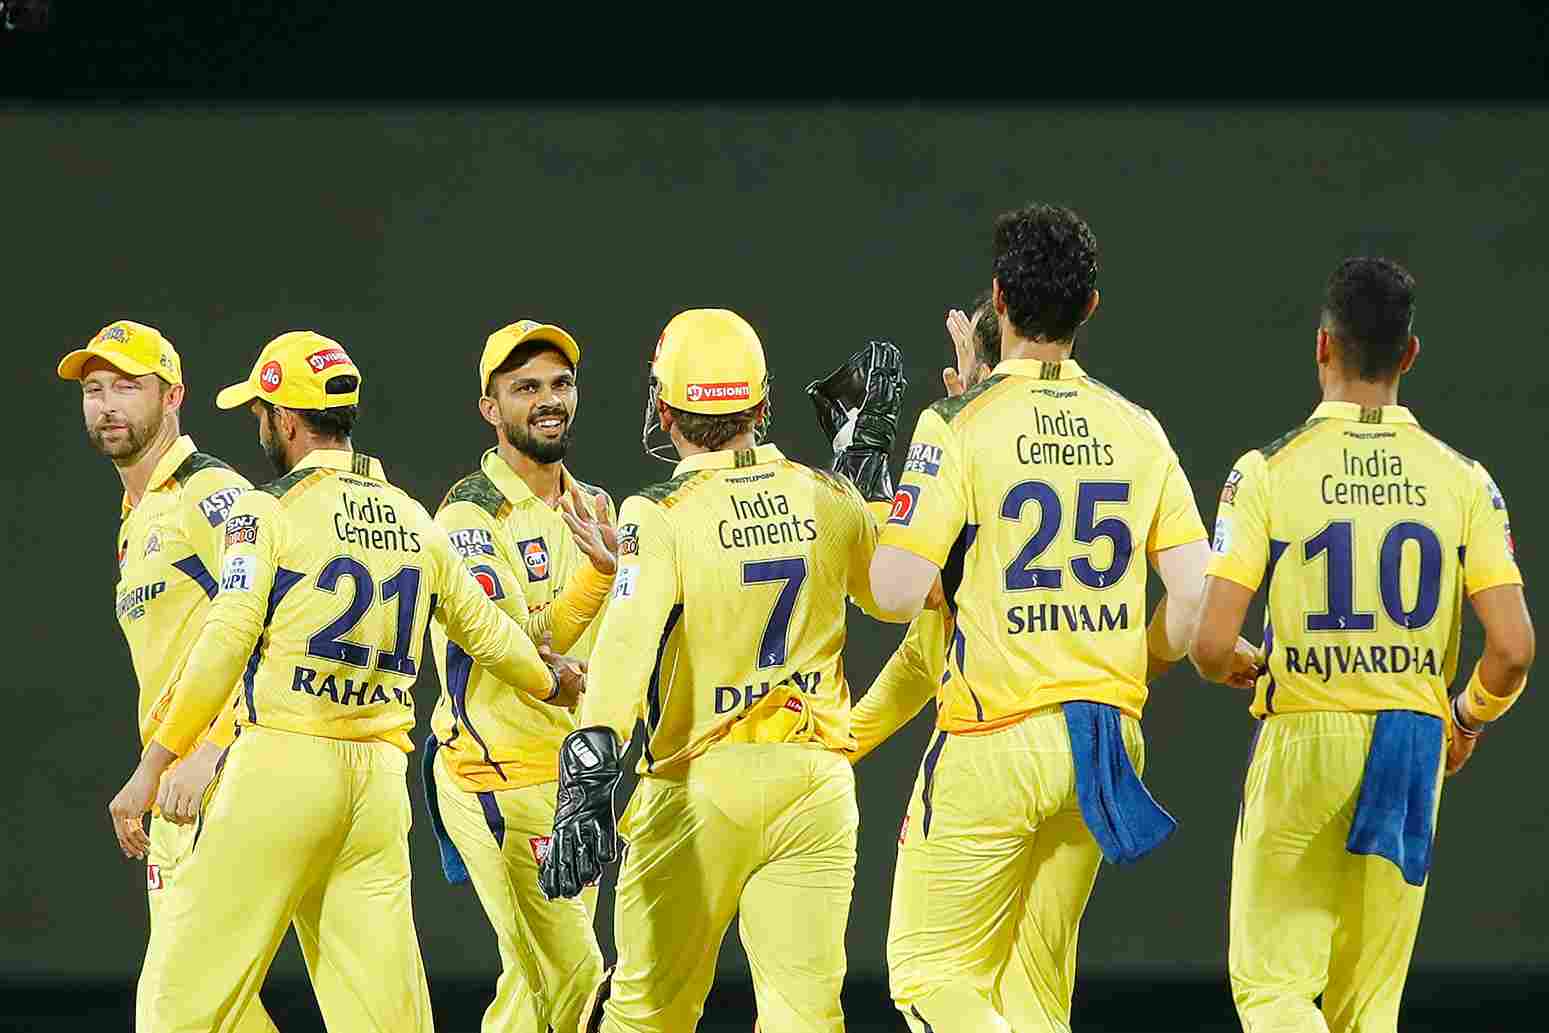 CSK Won, Ruturaj and Moeen Ali Are top Performers